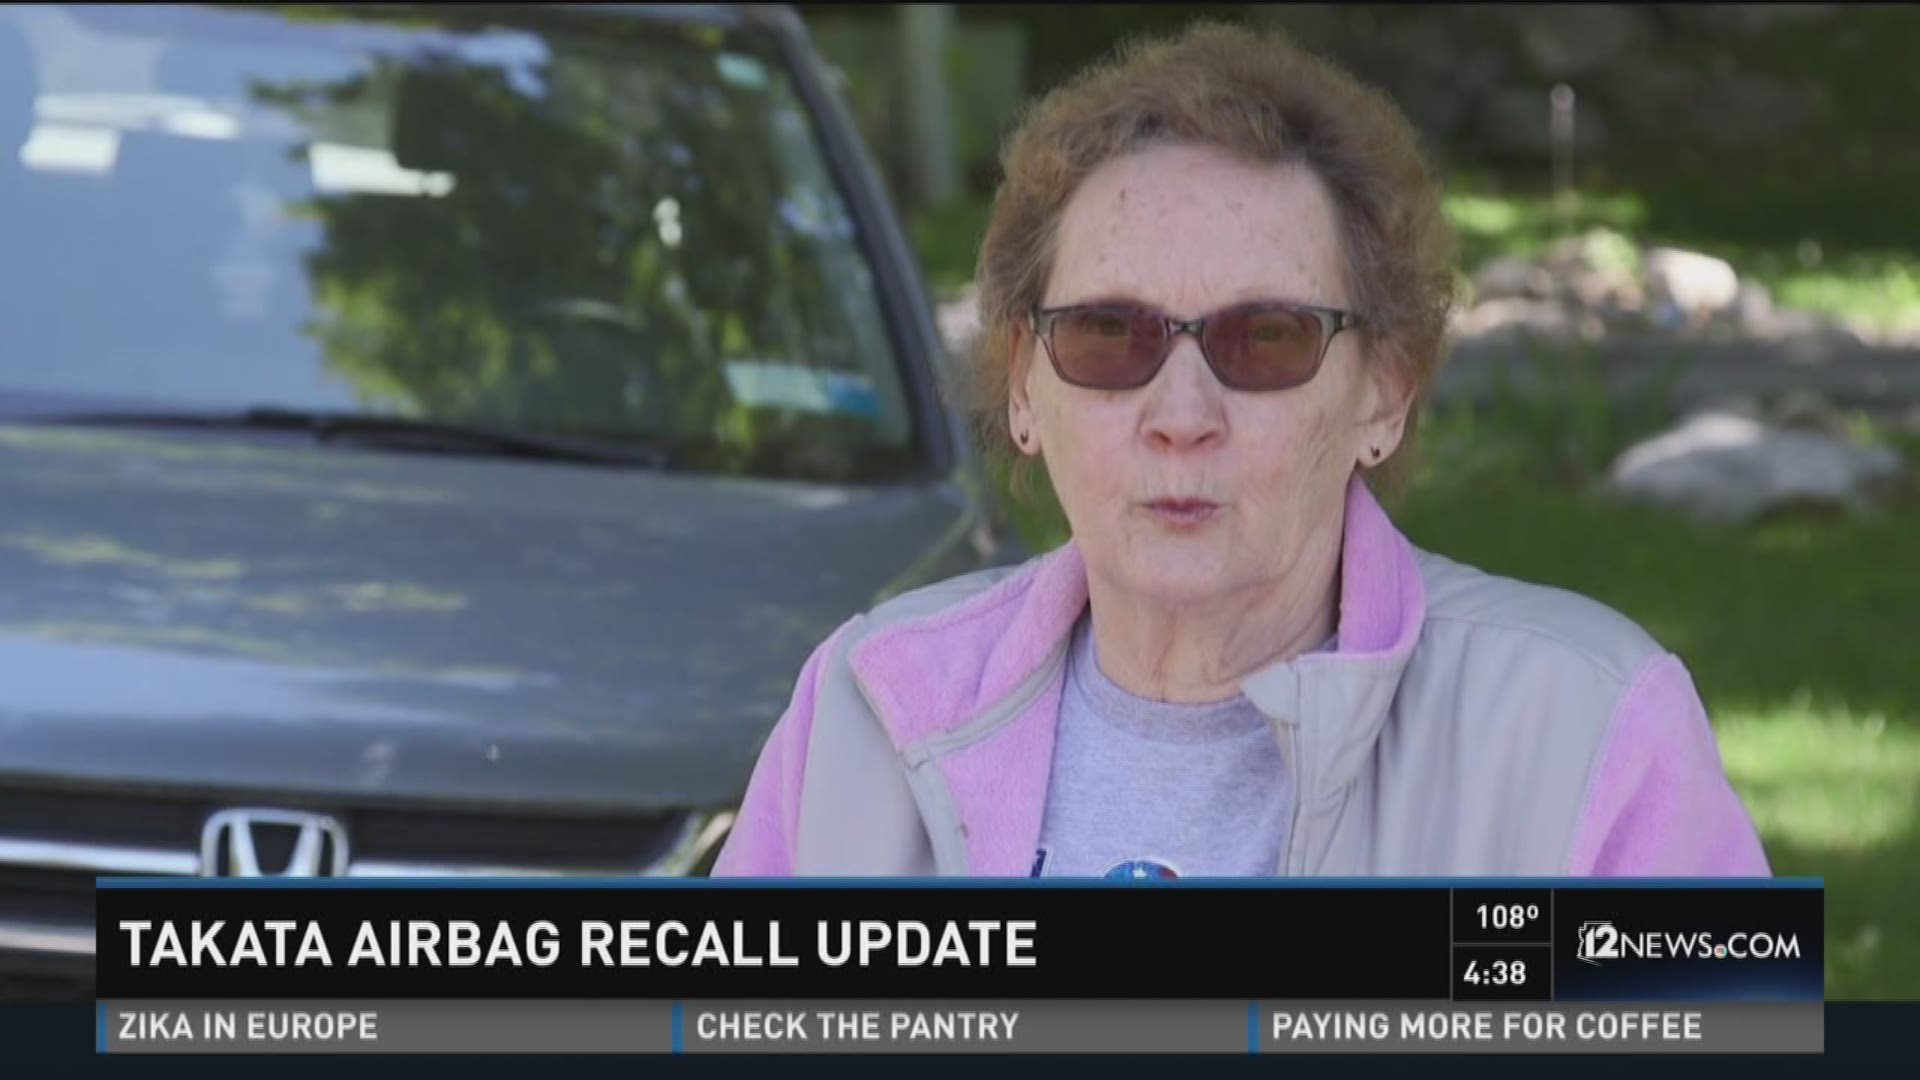 Tens of millions of Takata airbags need to be replaced after a massive recall.